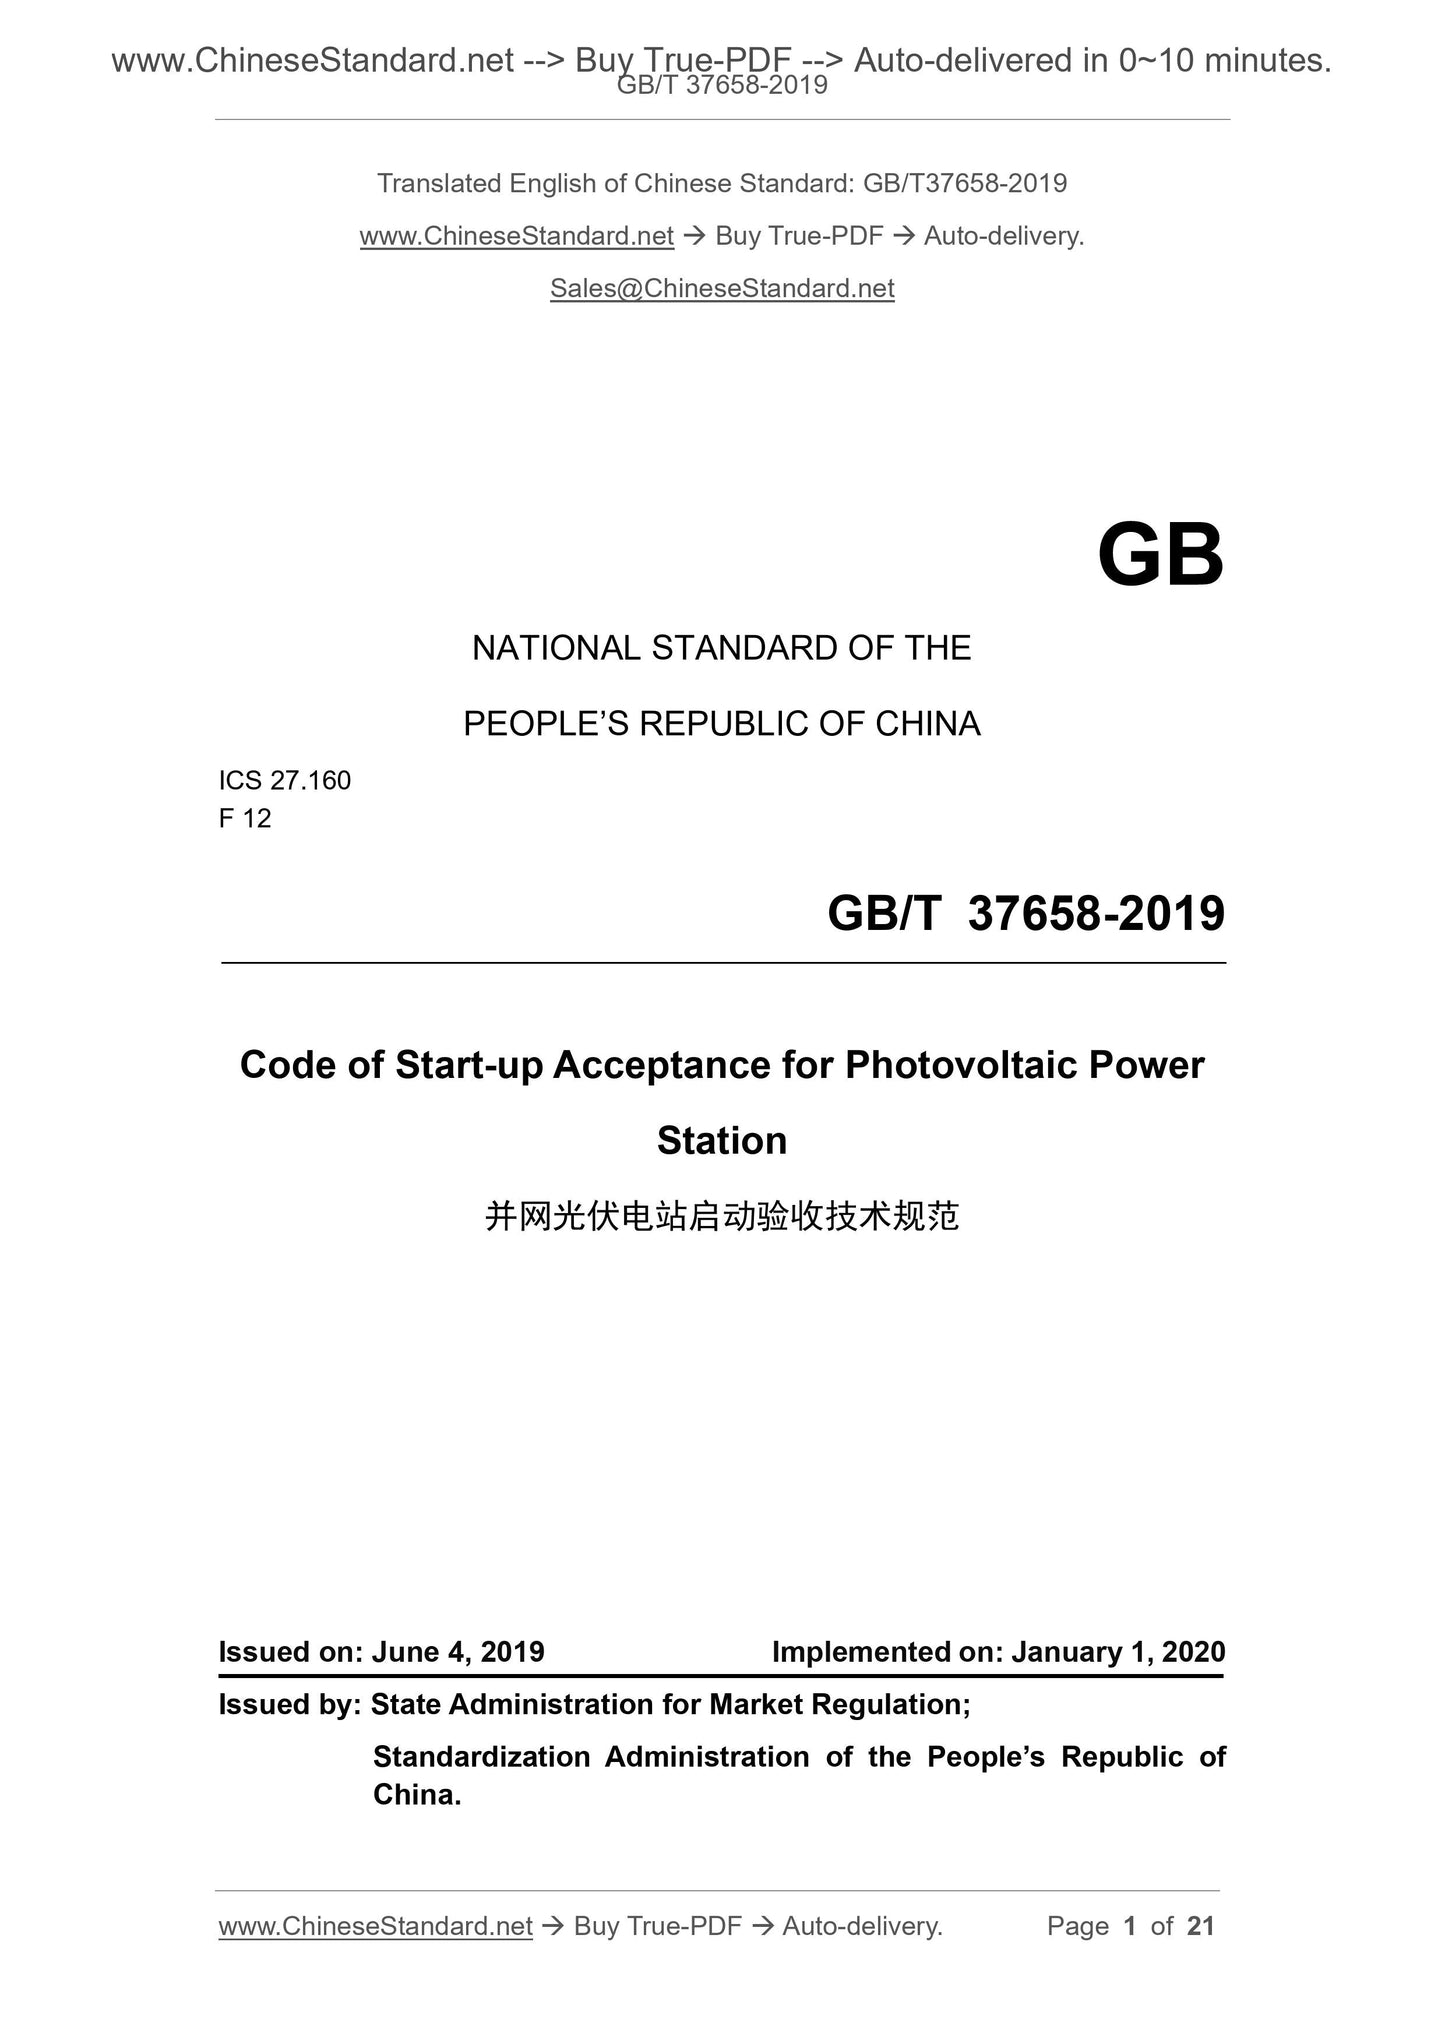 GB/T 37658-2019 Page 1